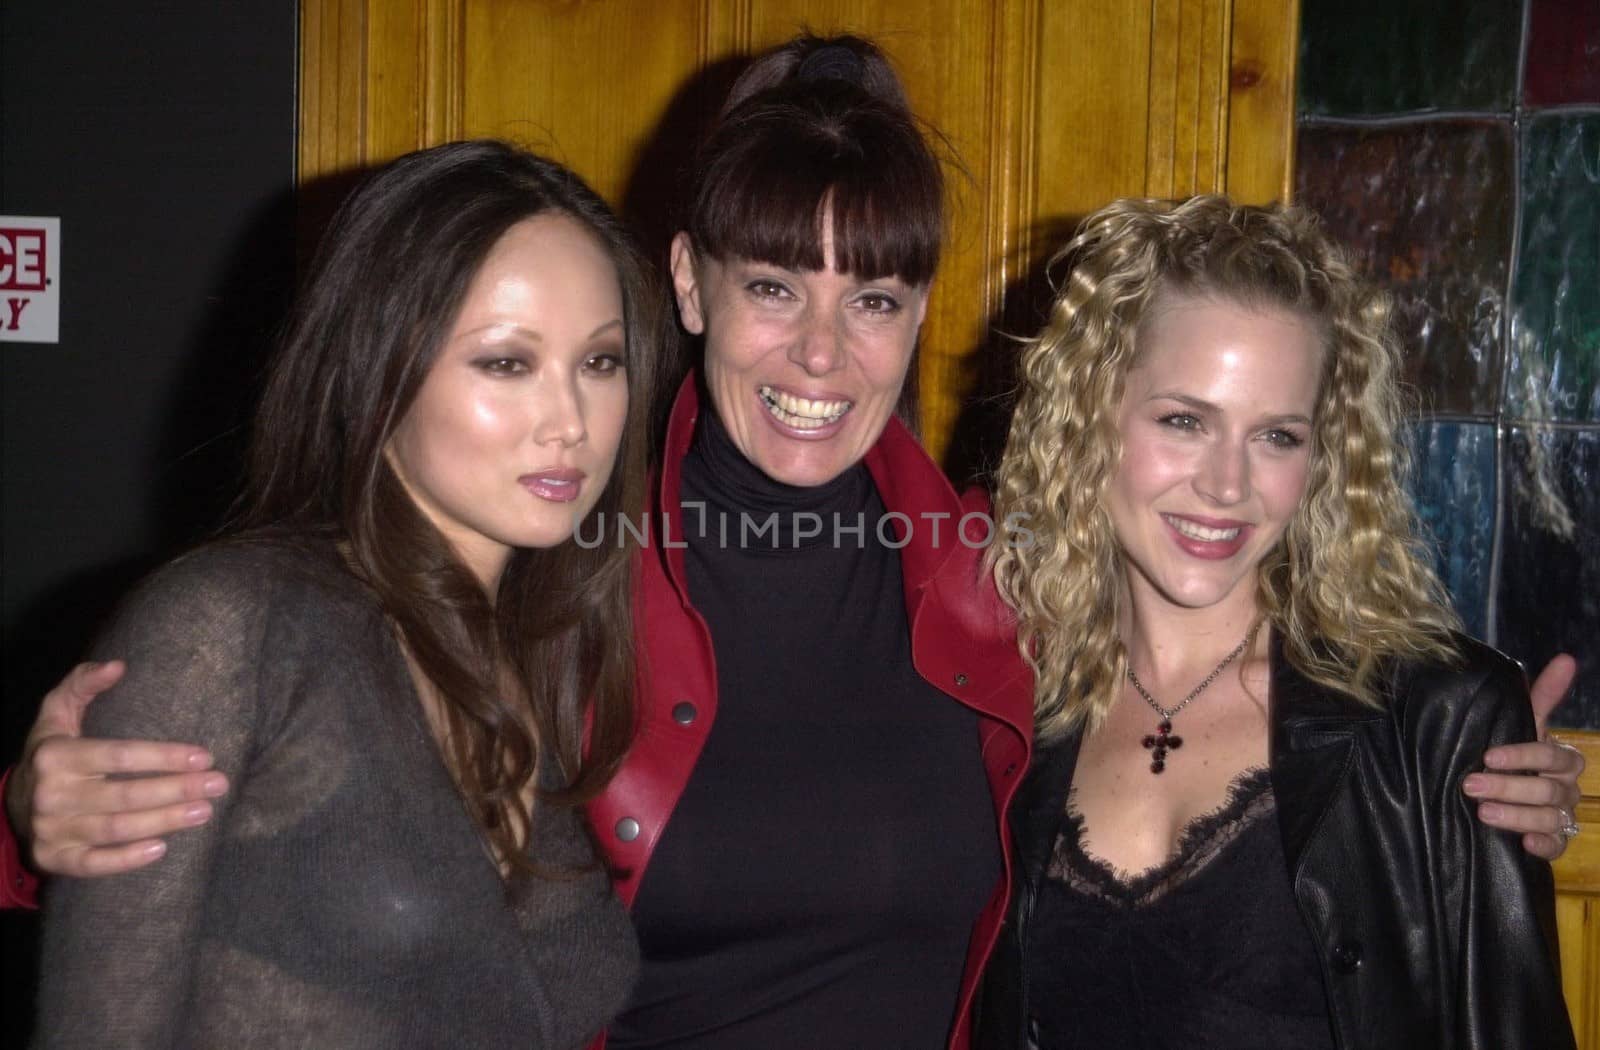 Susie Parks, Brenda Cooper and Julie Benz at the Make-A-Wish Foundation's Karmic Relief Benefit, Hollywood, 11-15-00